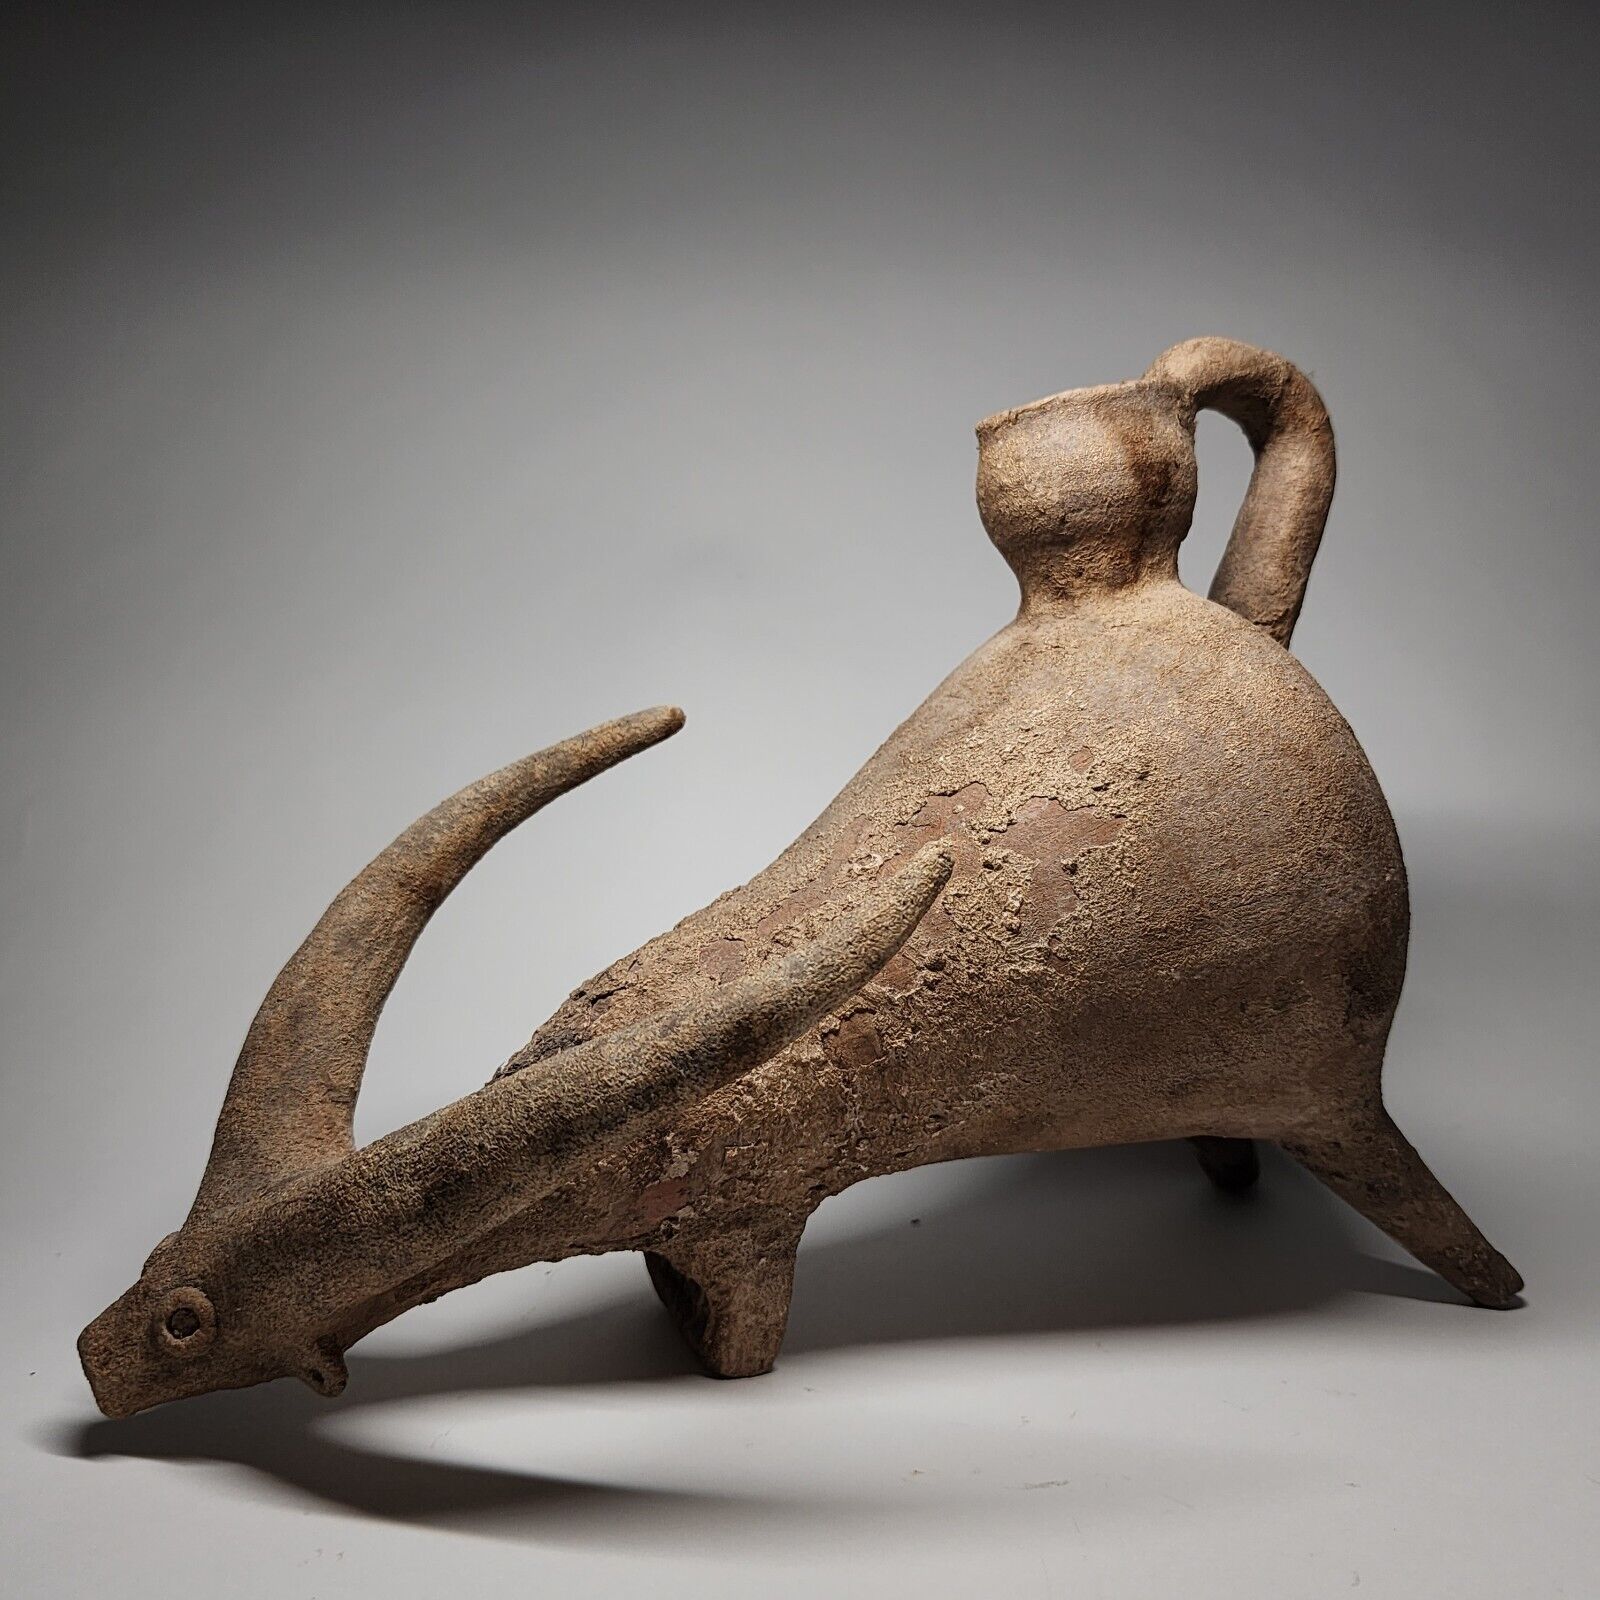 MUSEUM TYPE AN AMLASH PERIOD TERRACOTTA VESSEL IN A FORM OF AN ANIMAL DEER